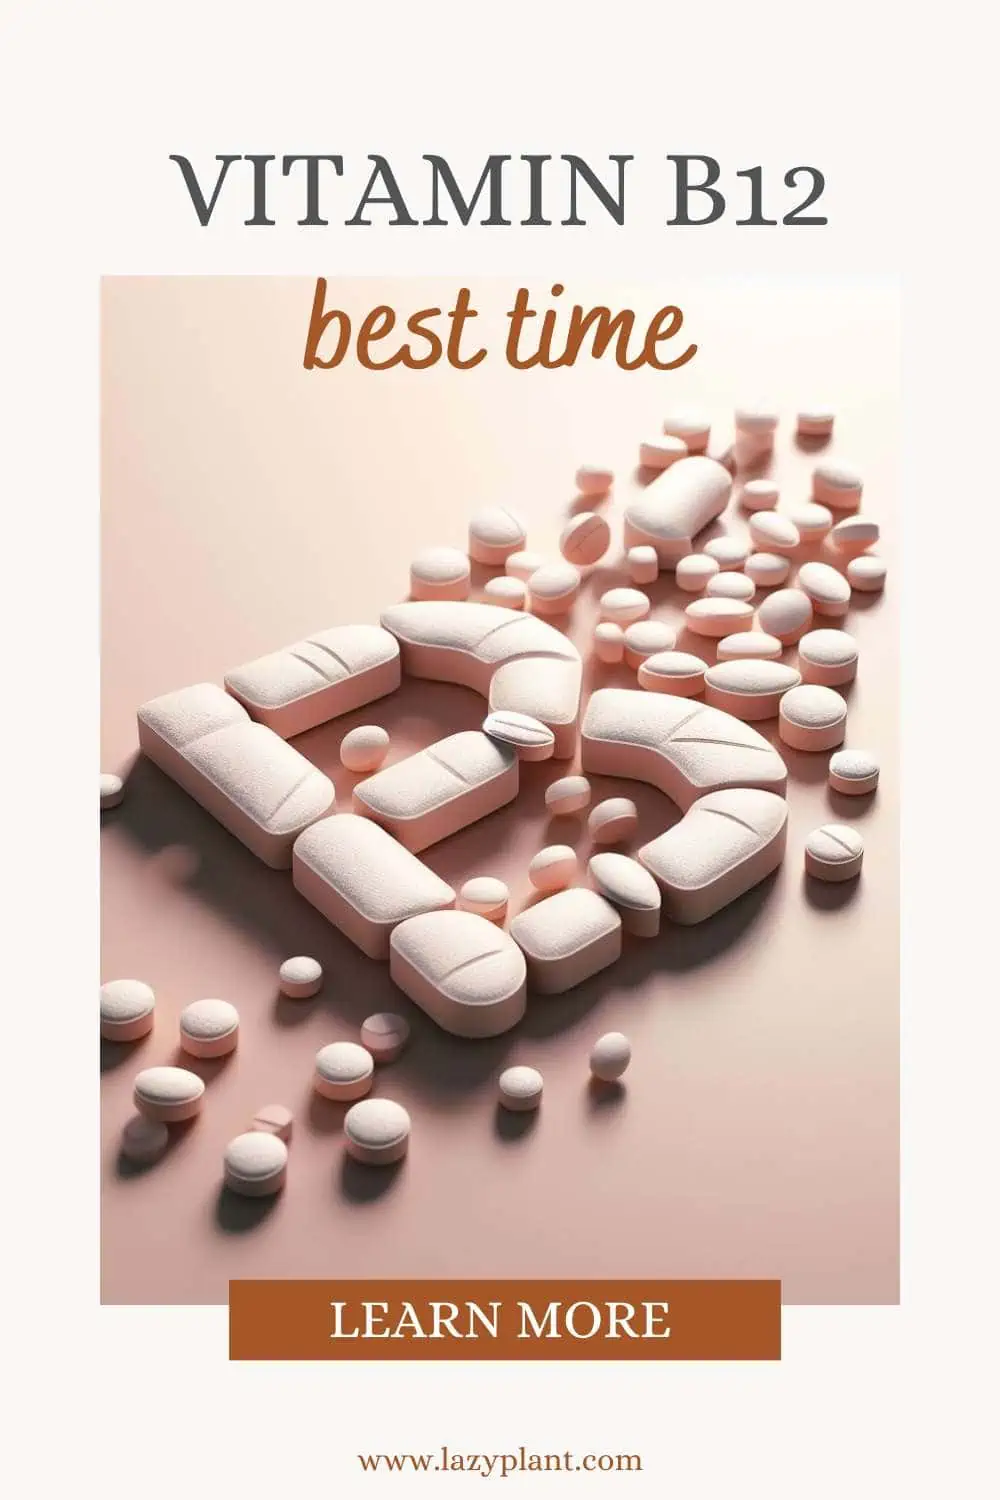 Vitamin B12 from dietary supplements: The best time to take.